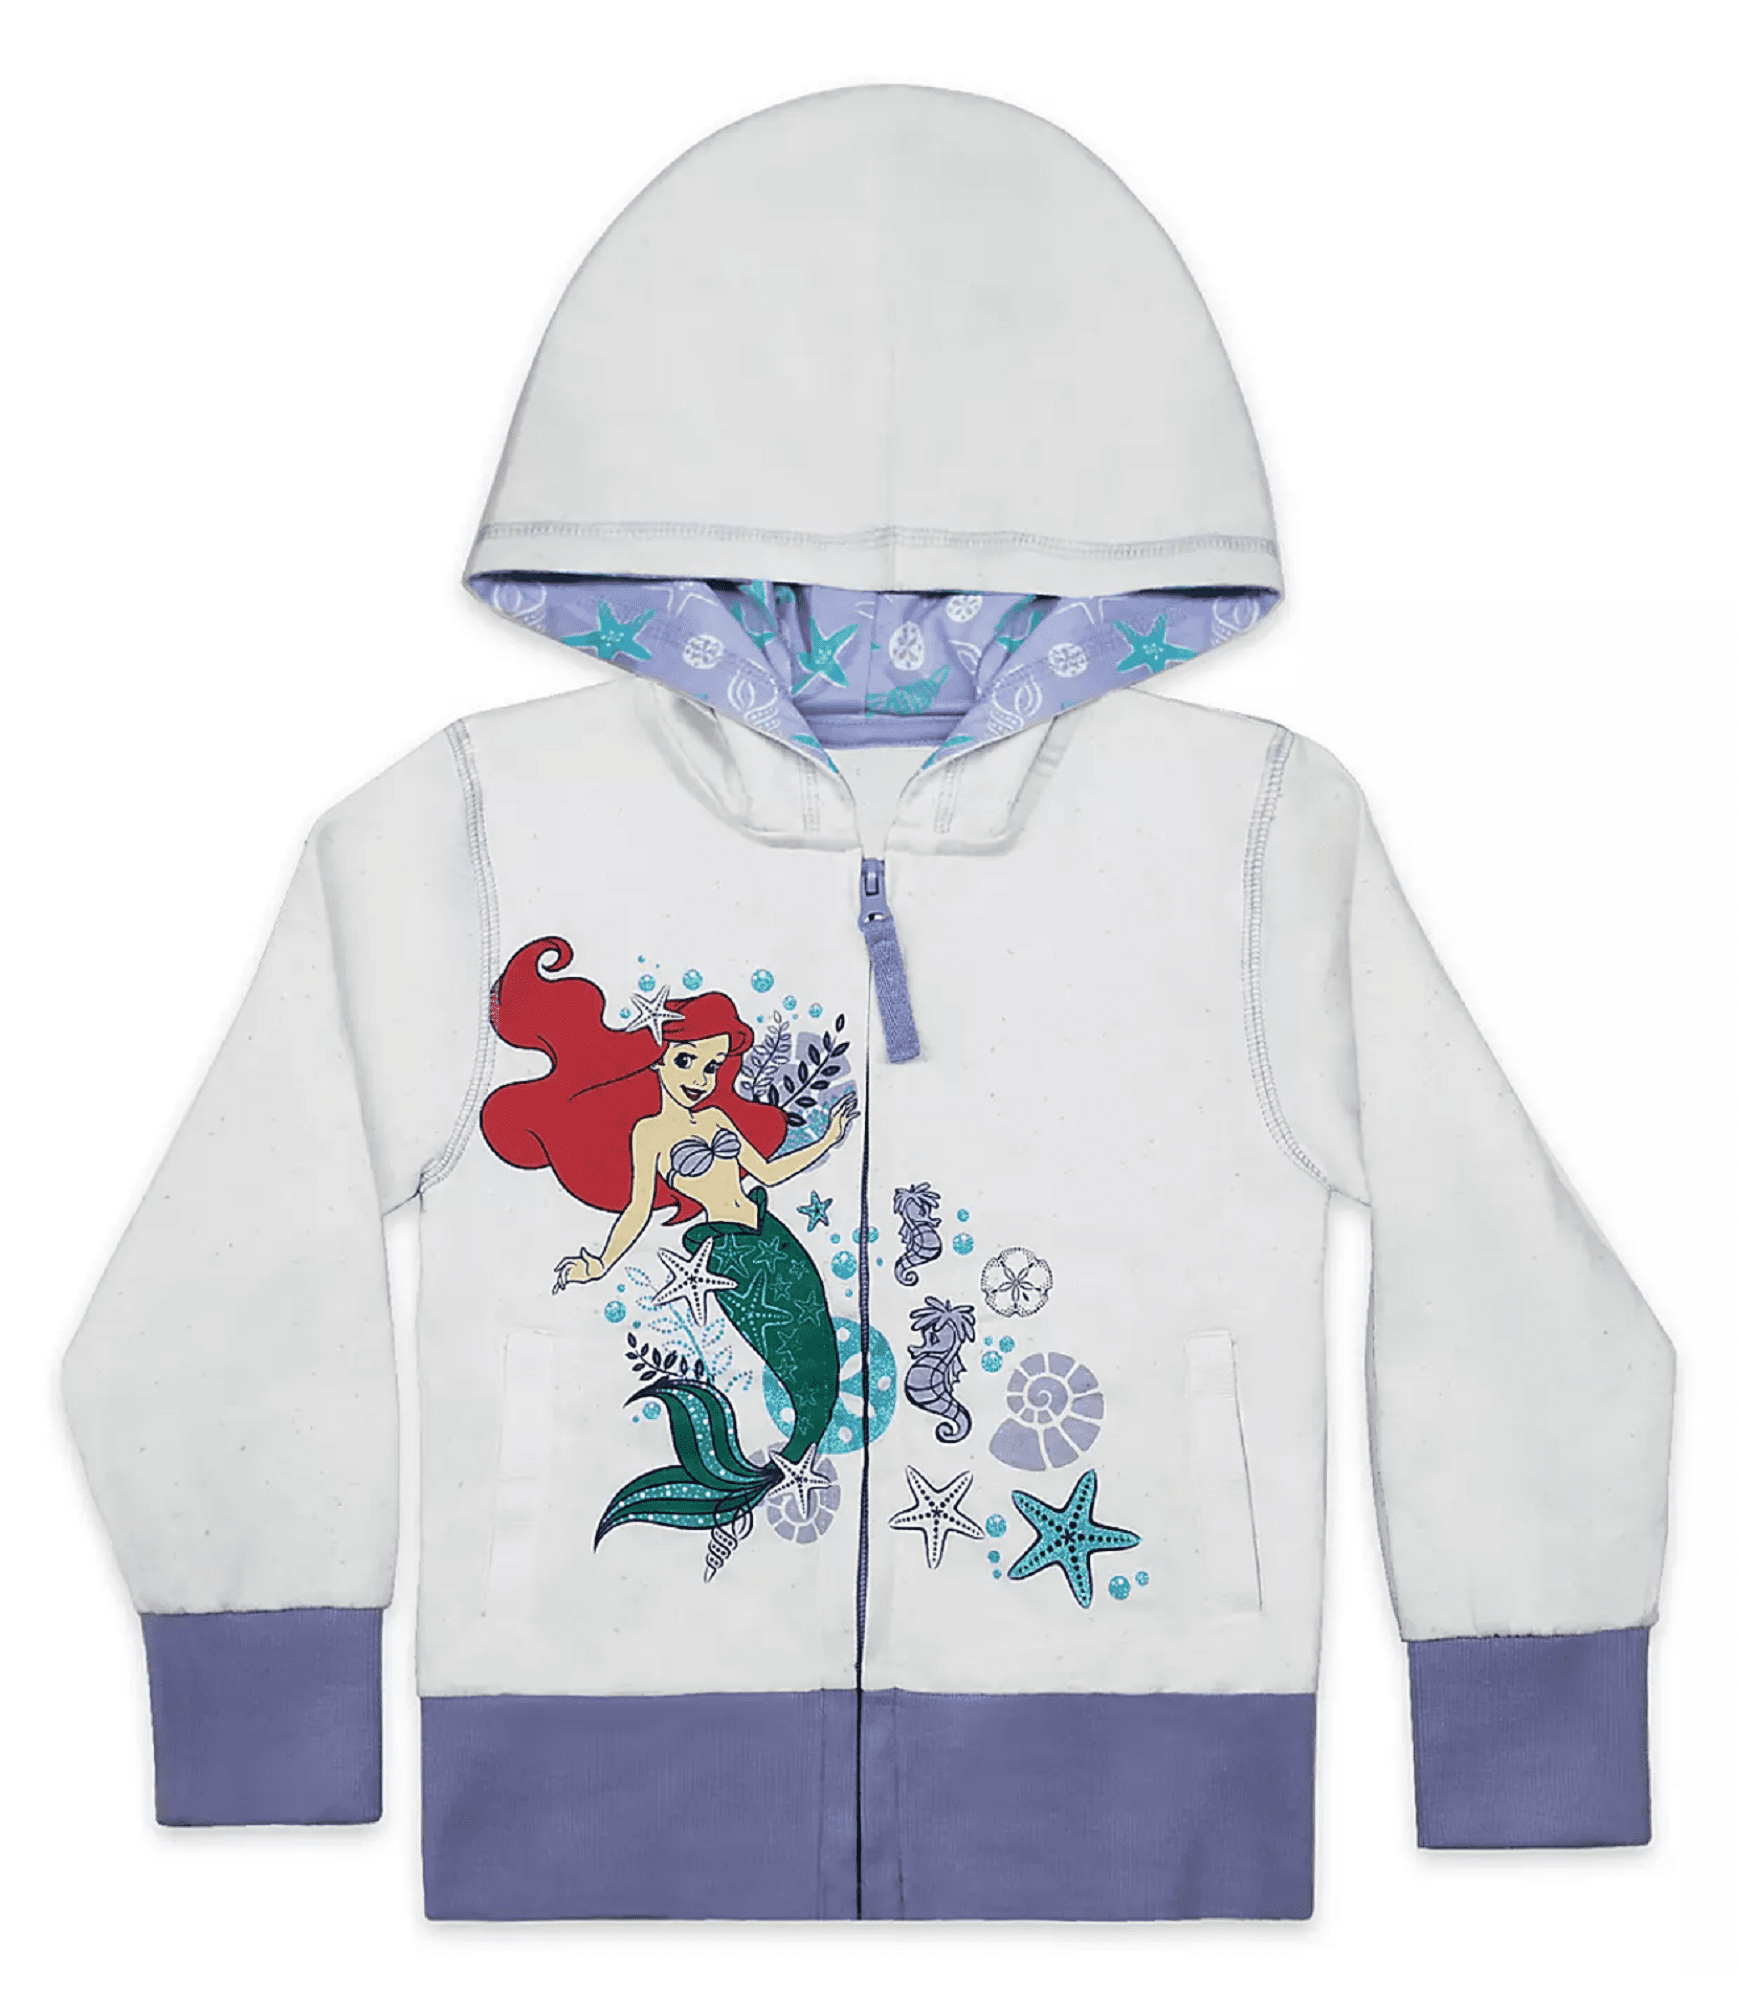 Disney The Little Mermaid Inspired Part of Your World Embroidered Unisex Sweatshirt Jumper T-Shirt or Hoodie